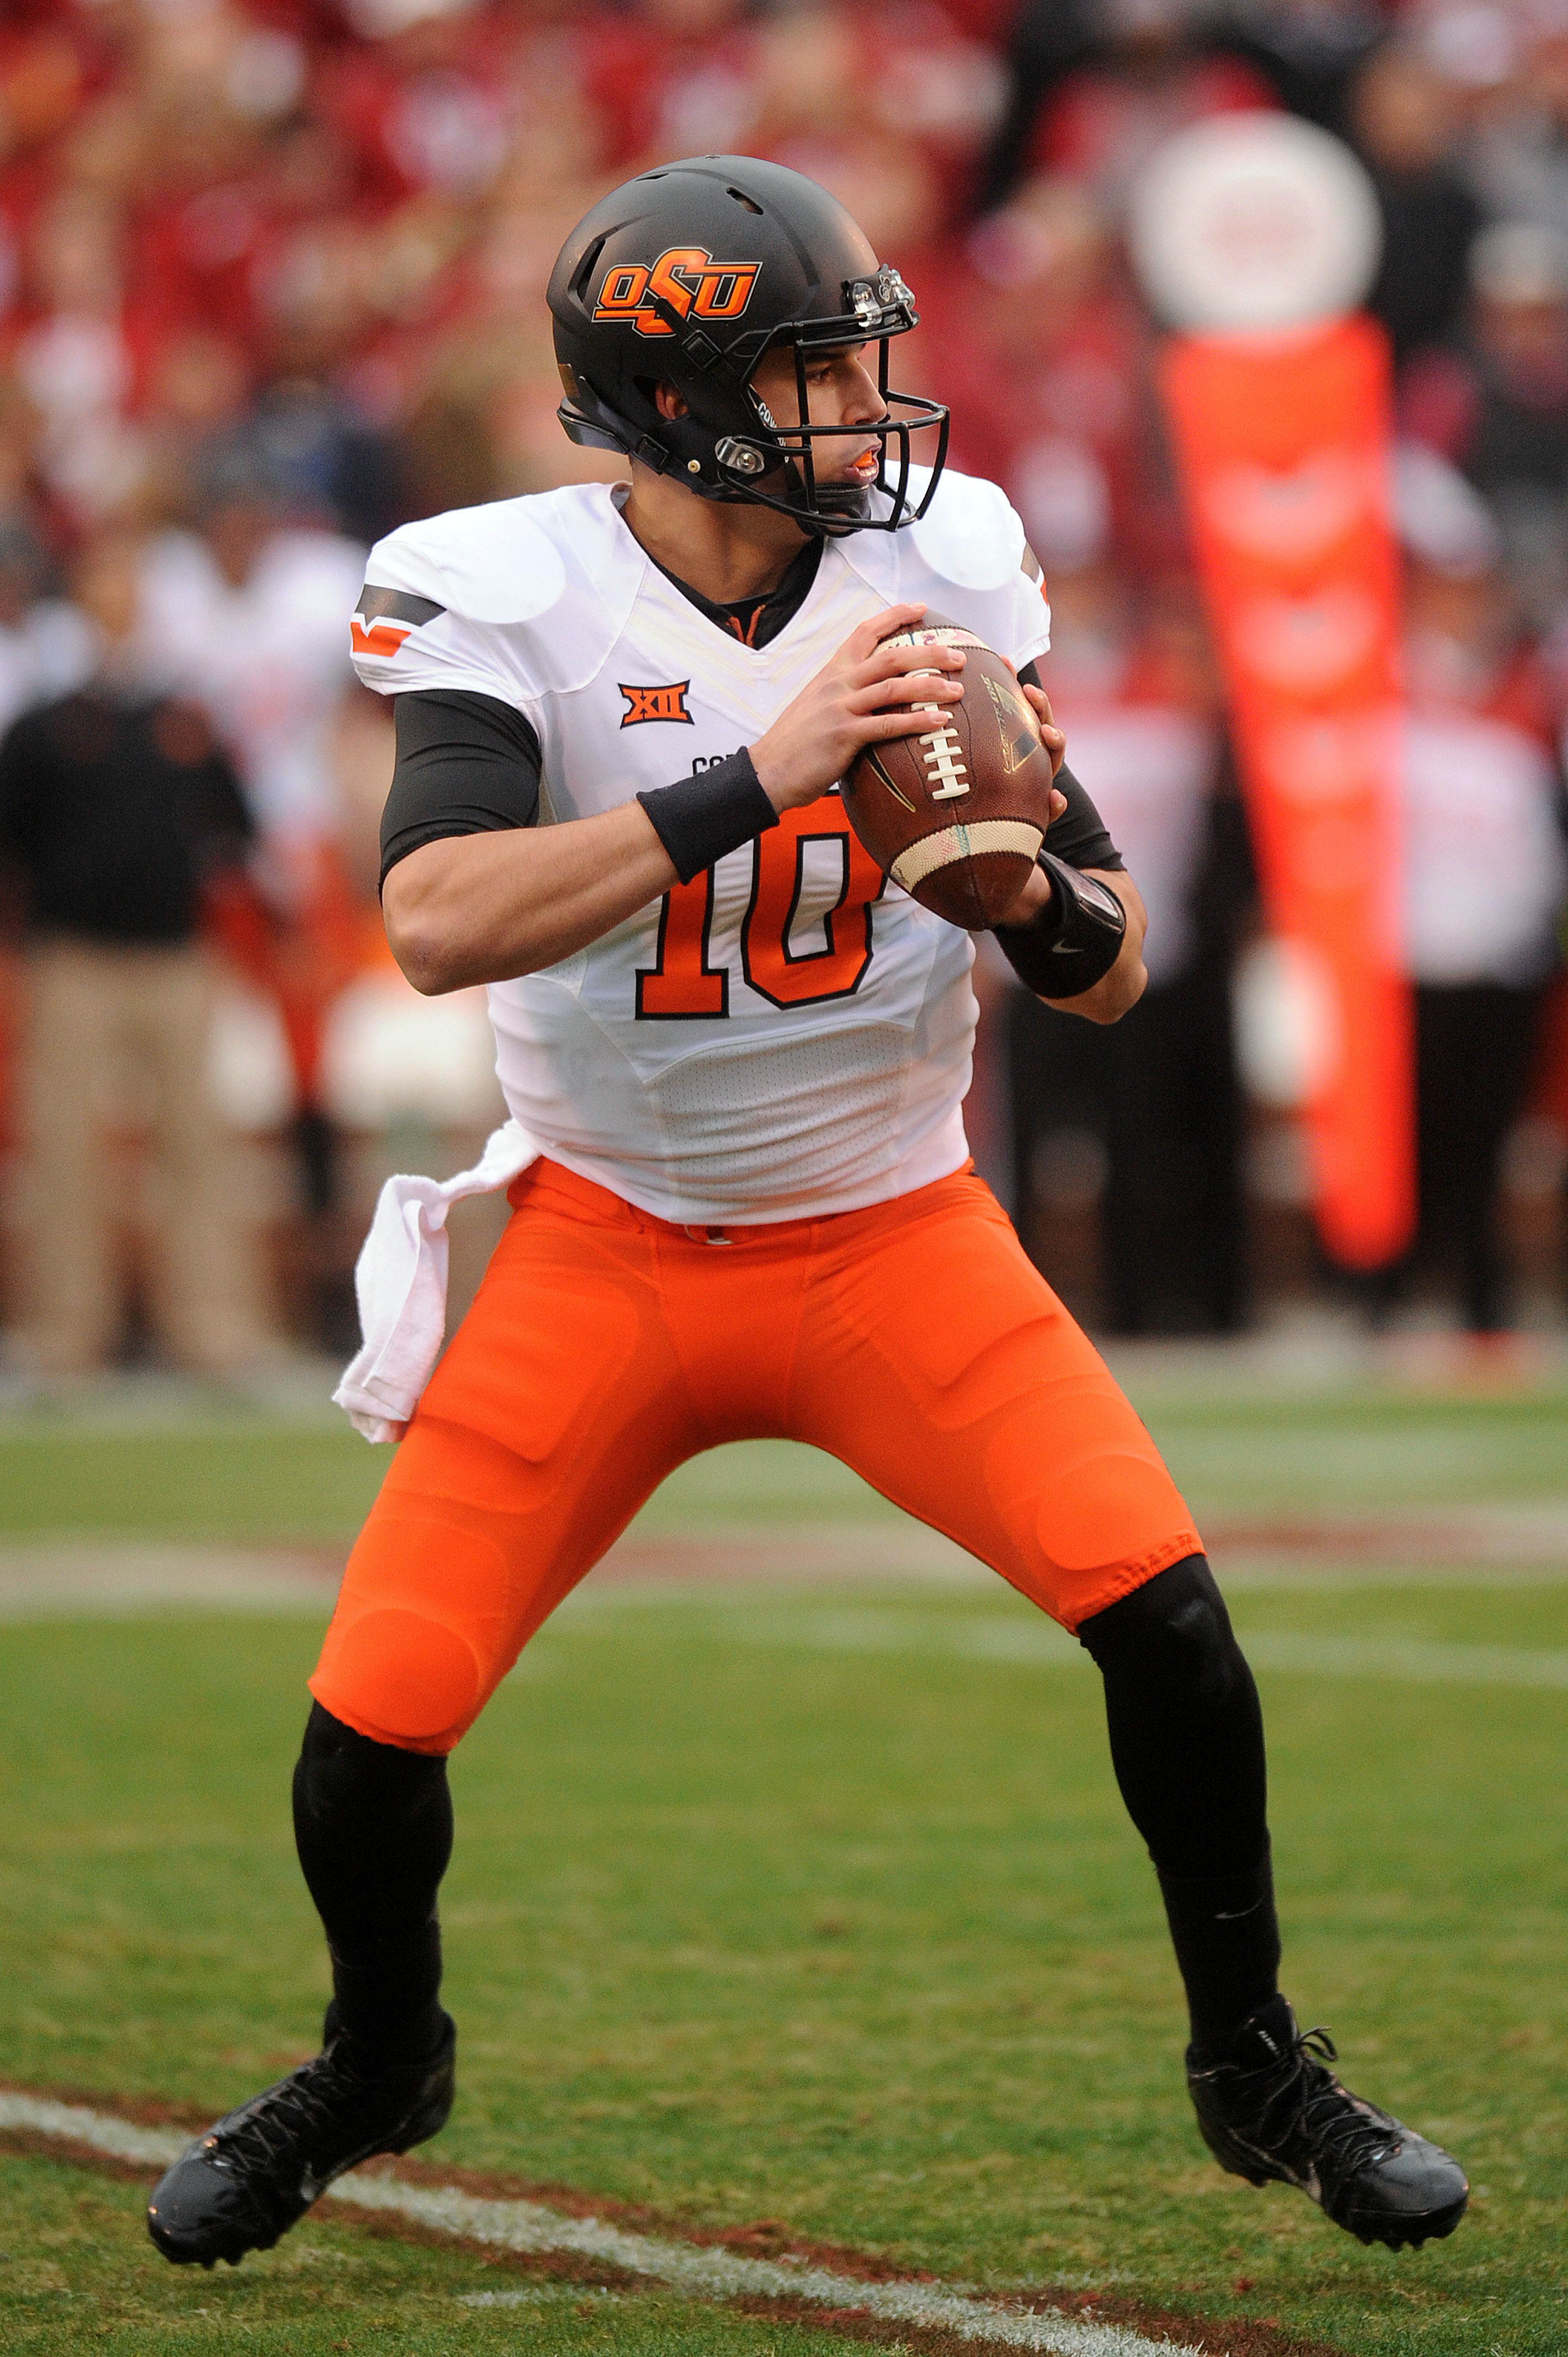 Dec 6, 2014; Norman, OK, USA; Oklahoma State Cowboys quarterback Mason Rudolph (10) looks to pass the ball against the Oklahoma Sooners during the first quarter at Gaylord Family - Oklahoma Memorial Stadium. (Mark D. Smith-USA TODAY Sports)